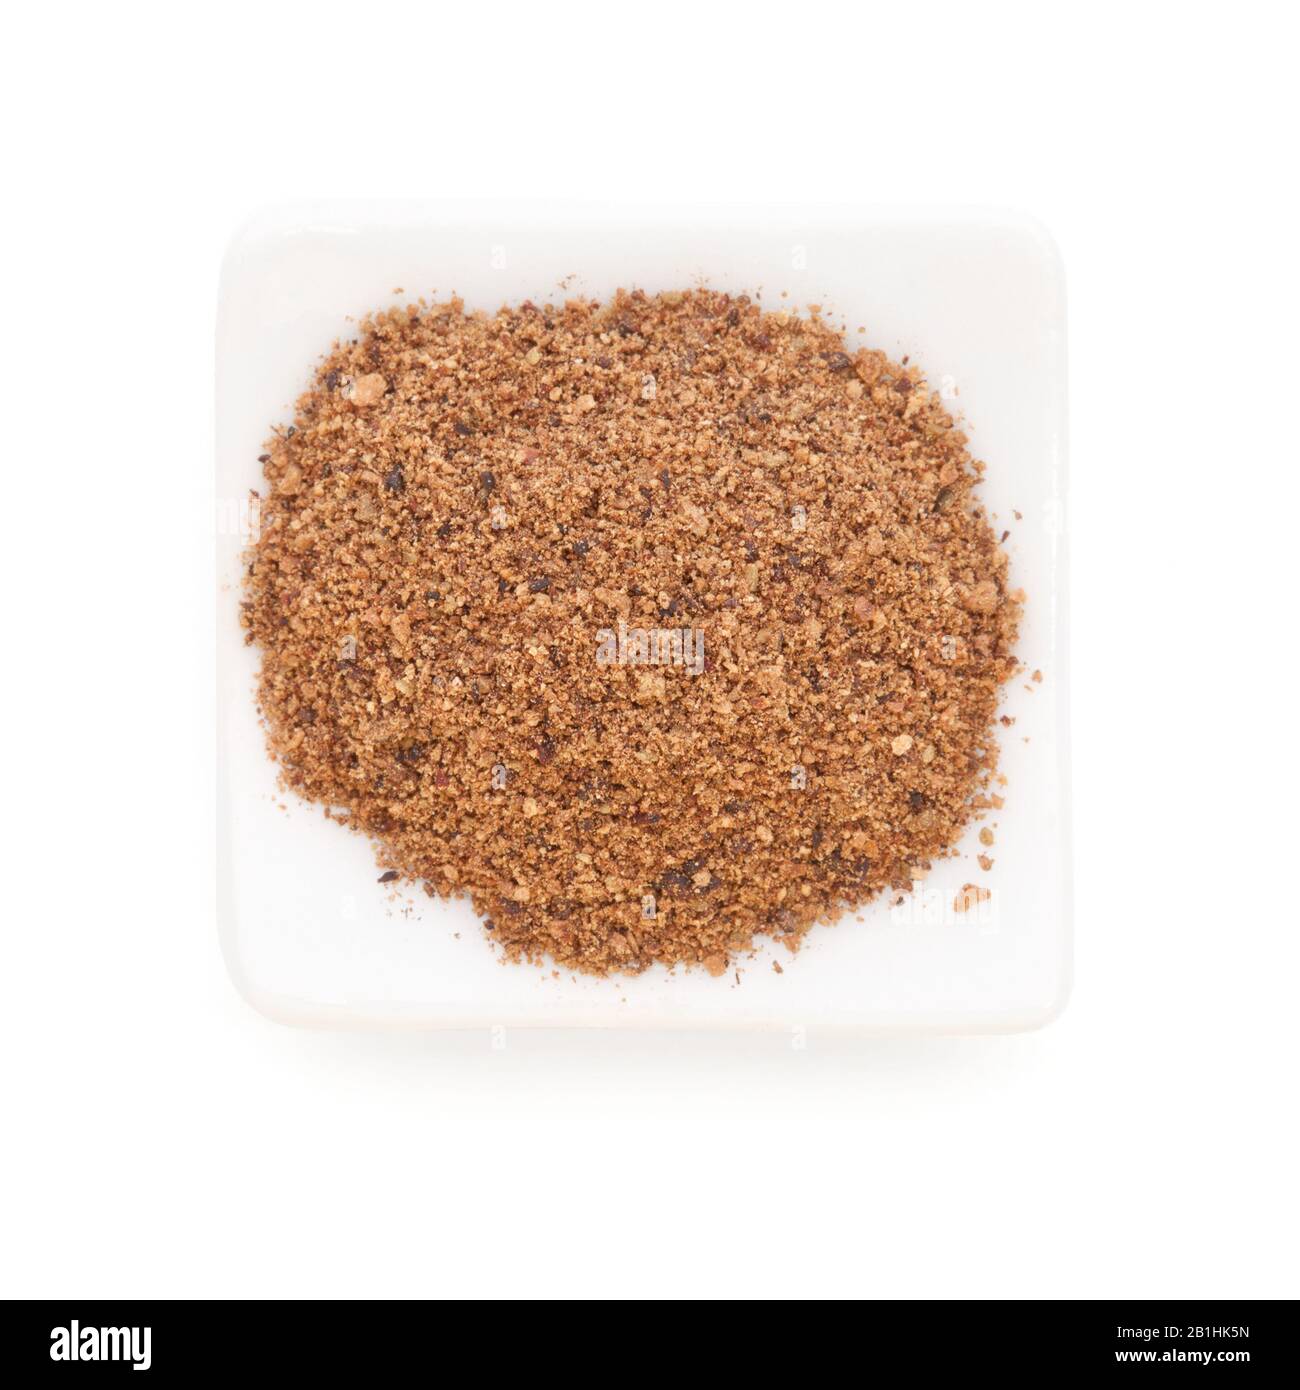 Nutmeg Powder Myristica Fragrans In A White Bowl On White Background Used As A Spice In Many Sweet As Well As Savoury Dishes And Medicine Stock Photo Alamy,Fire Belly Newt Habitat